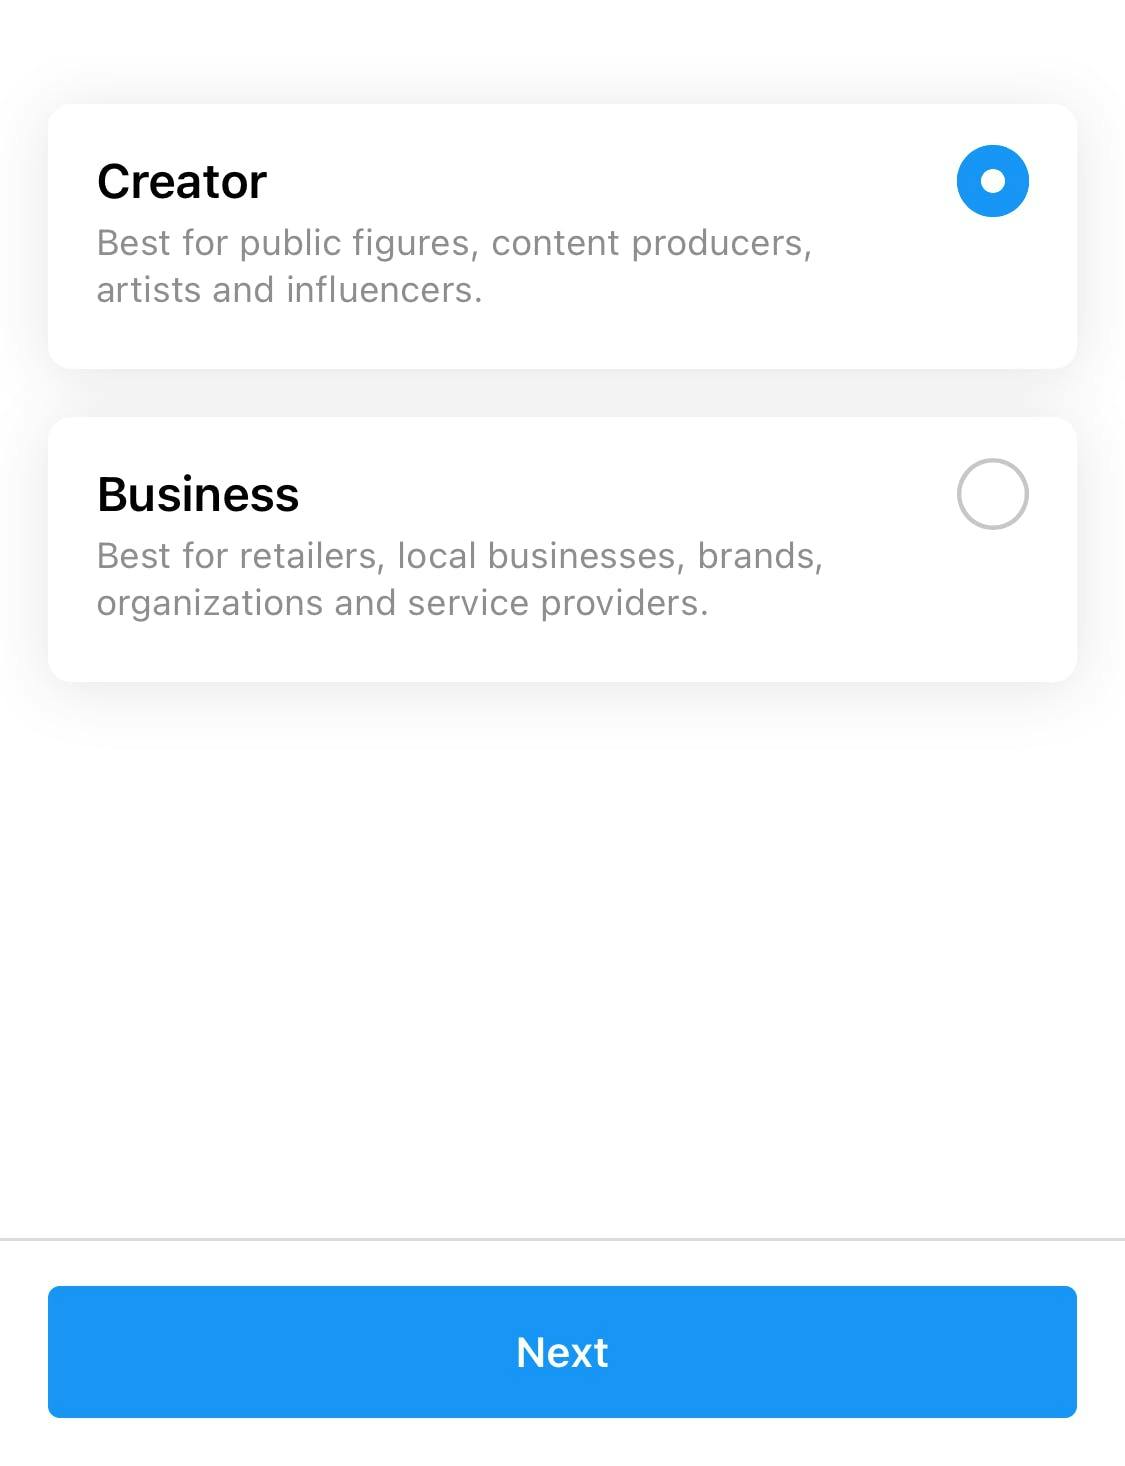 Choosing a category for your Instagram business account